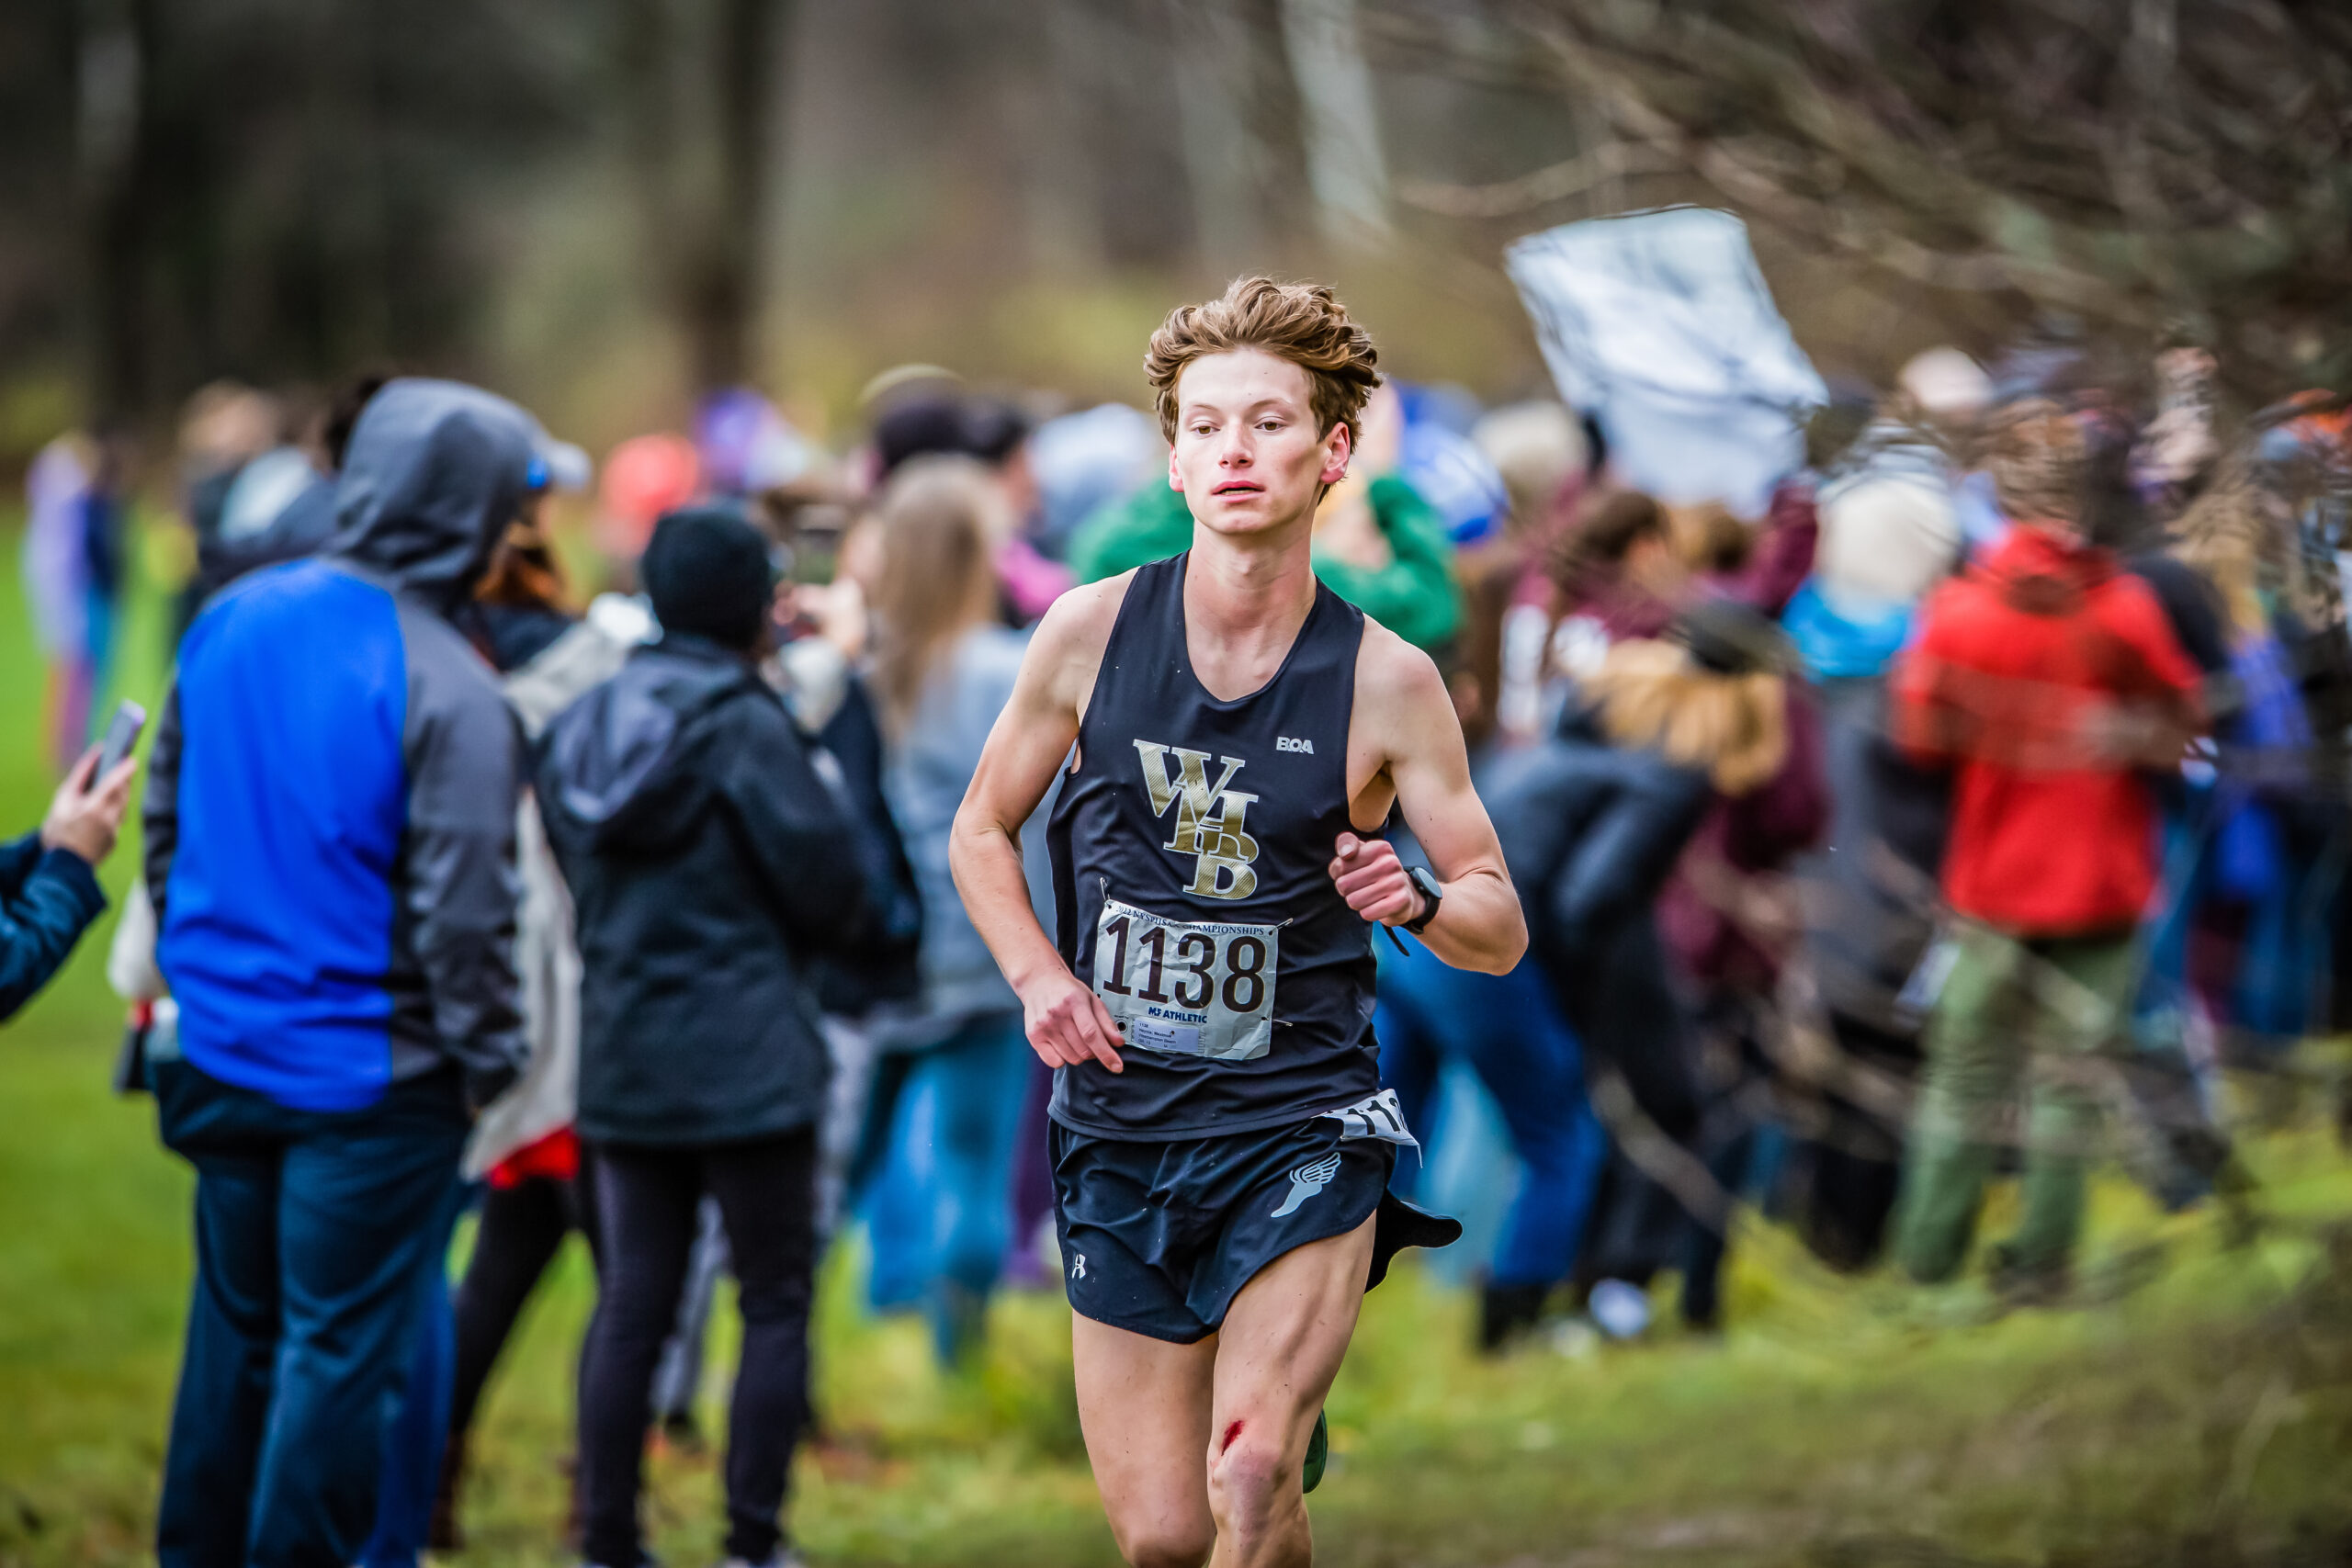 Max Haynia was just the second cross country runner in school history to reach Nationals.    REBECCA MCMANUS